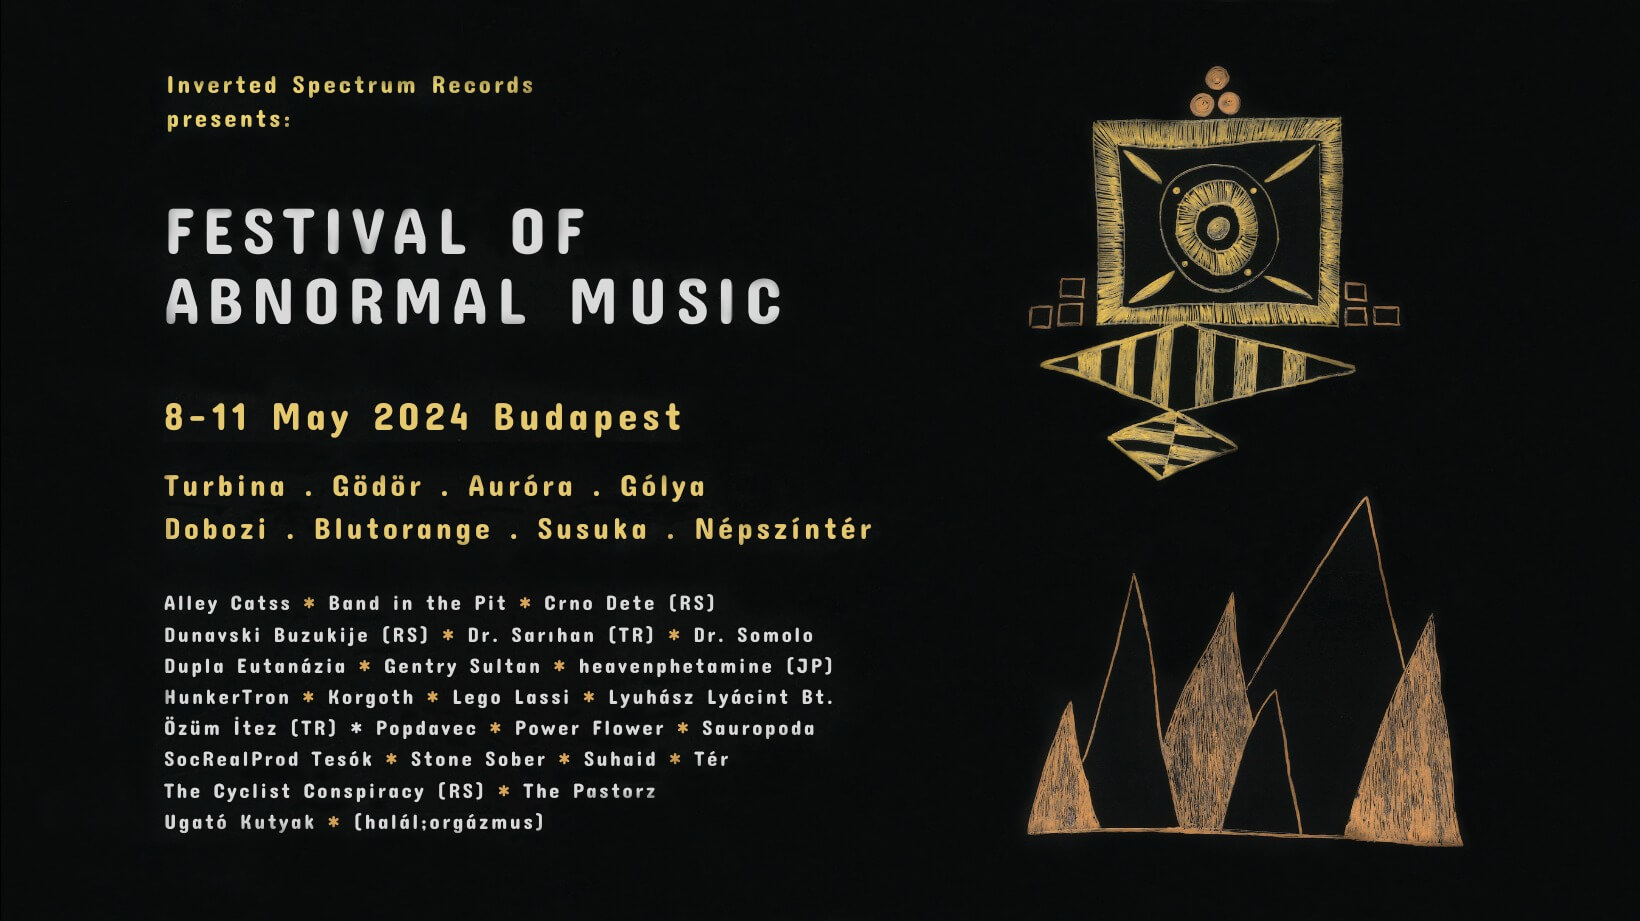 'Festival of Abnormal Music', Budapest, 8 - 11 May